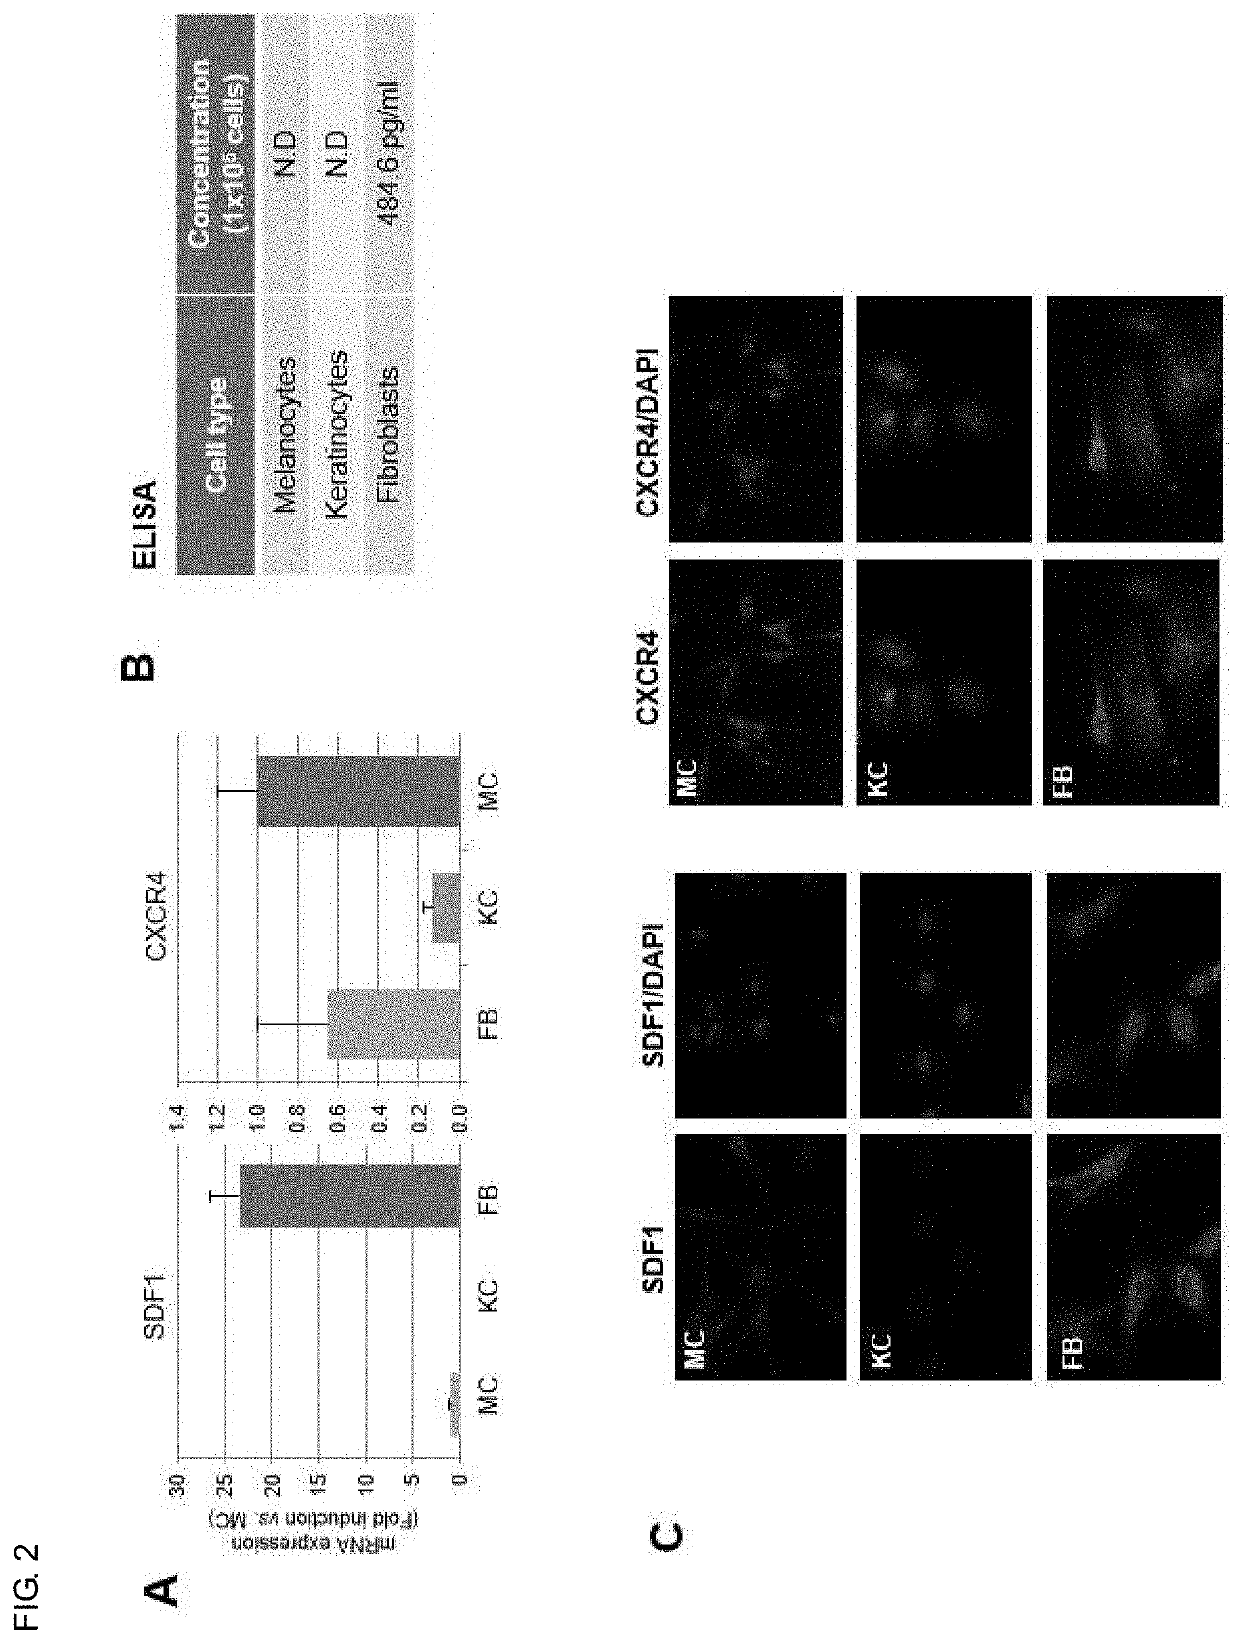 Composition for regulating cutaneous pigmentation or skin whitening comprising SDF1